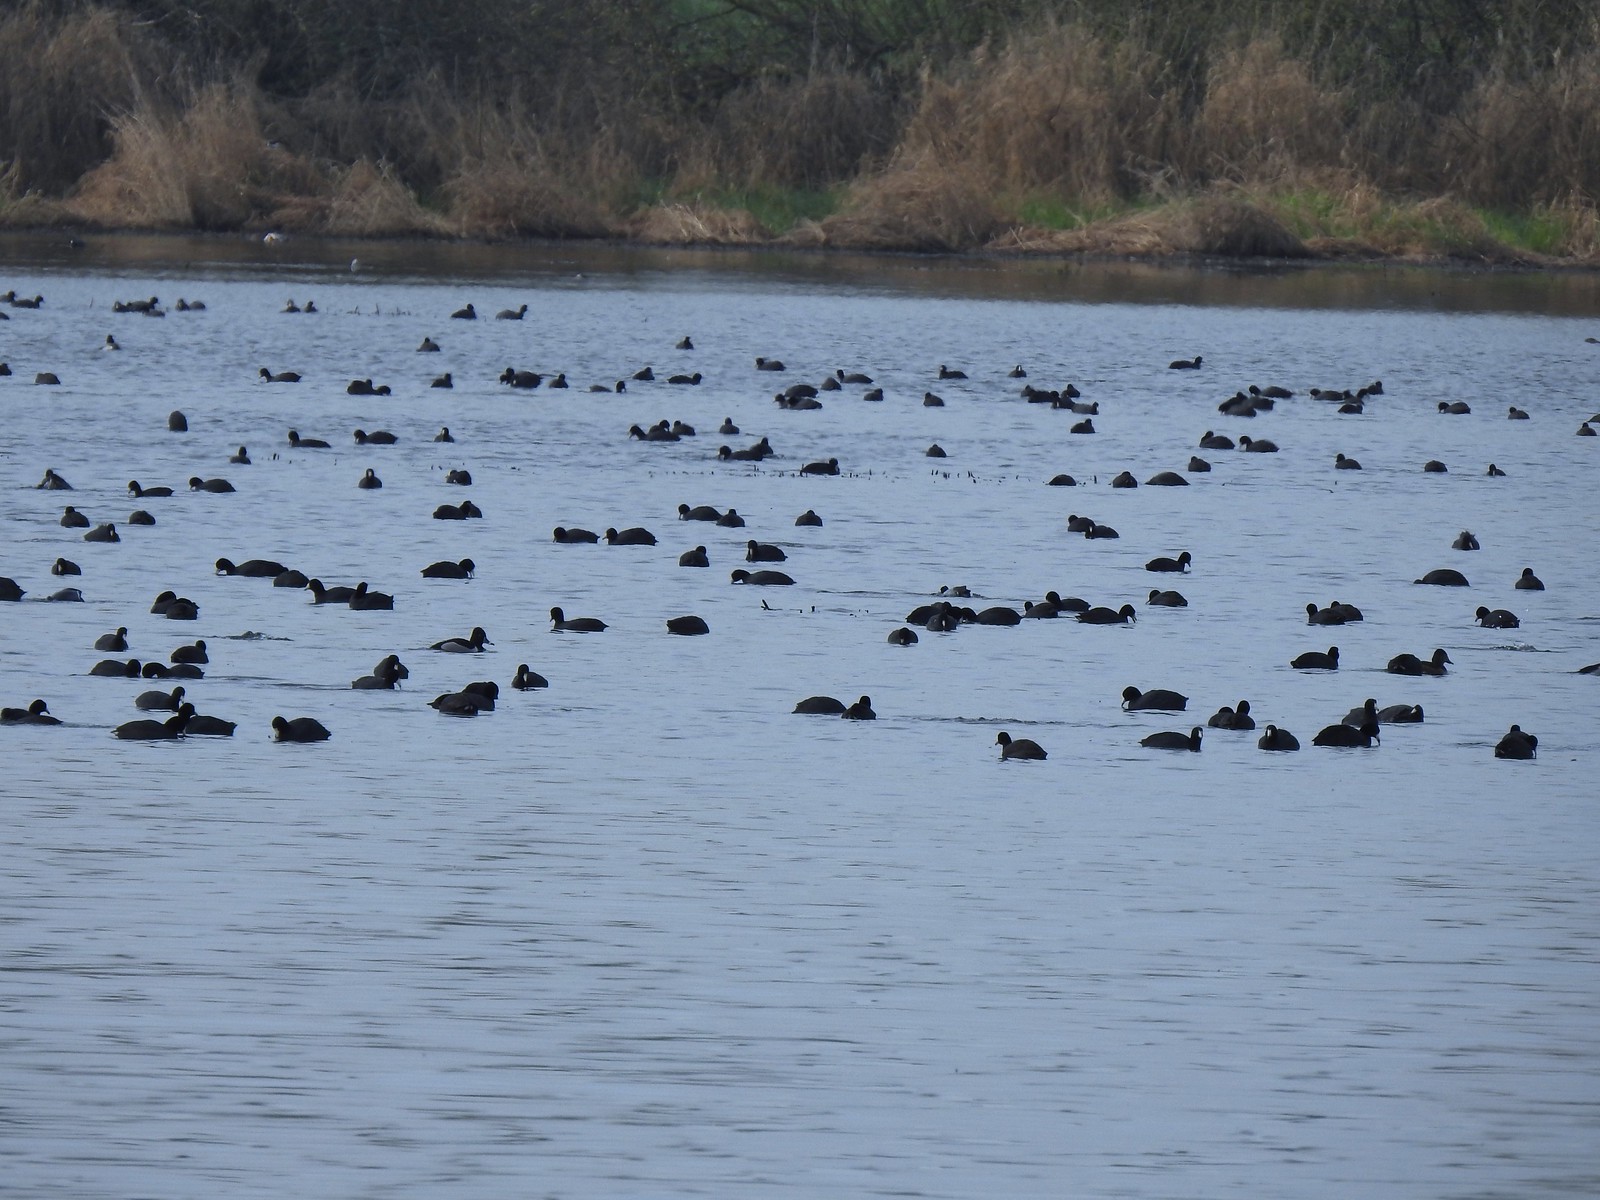 American coots and some ducks